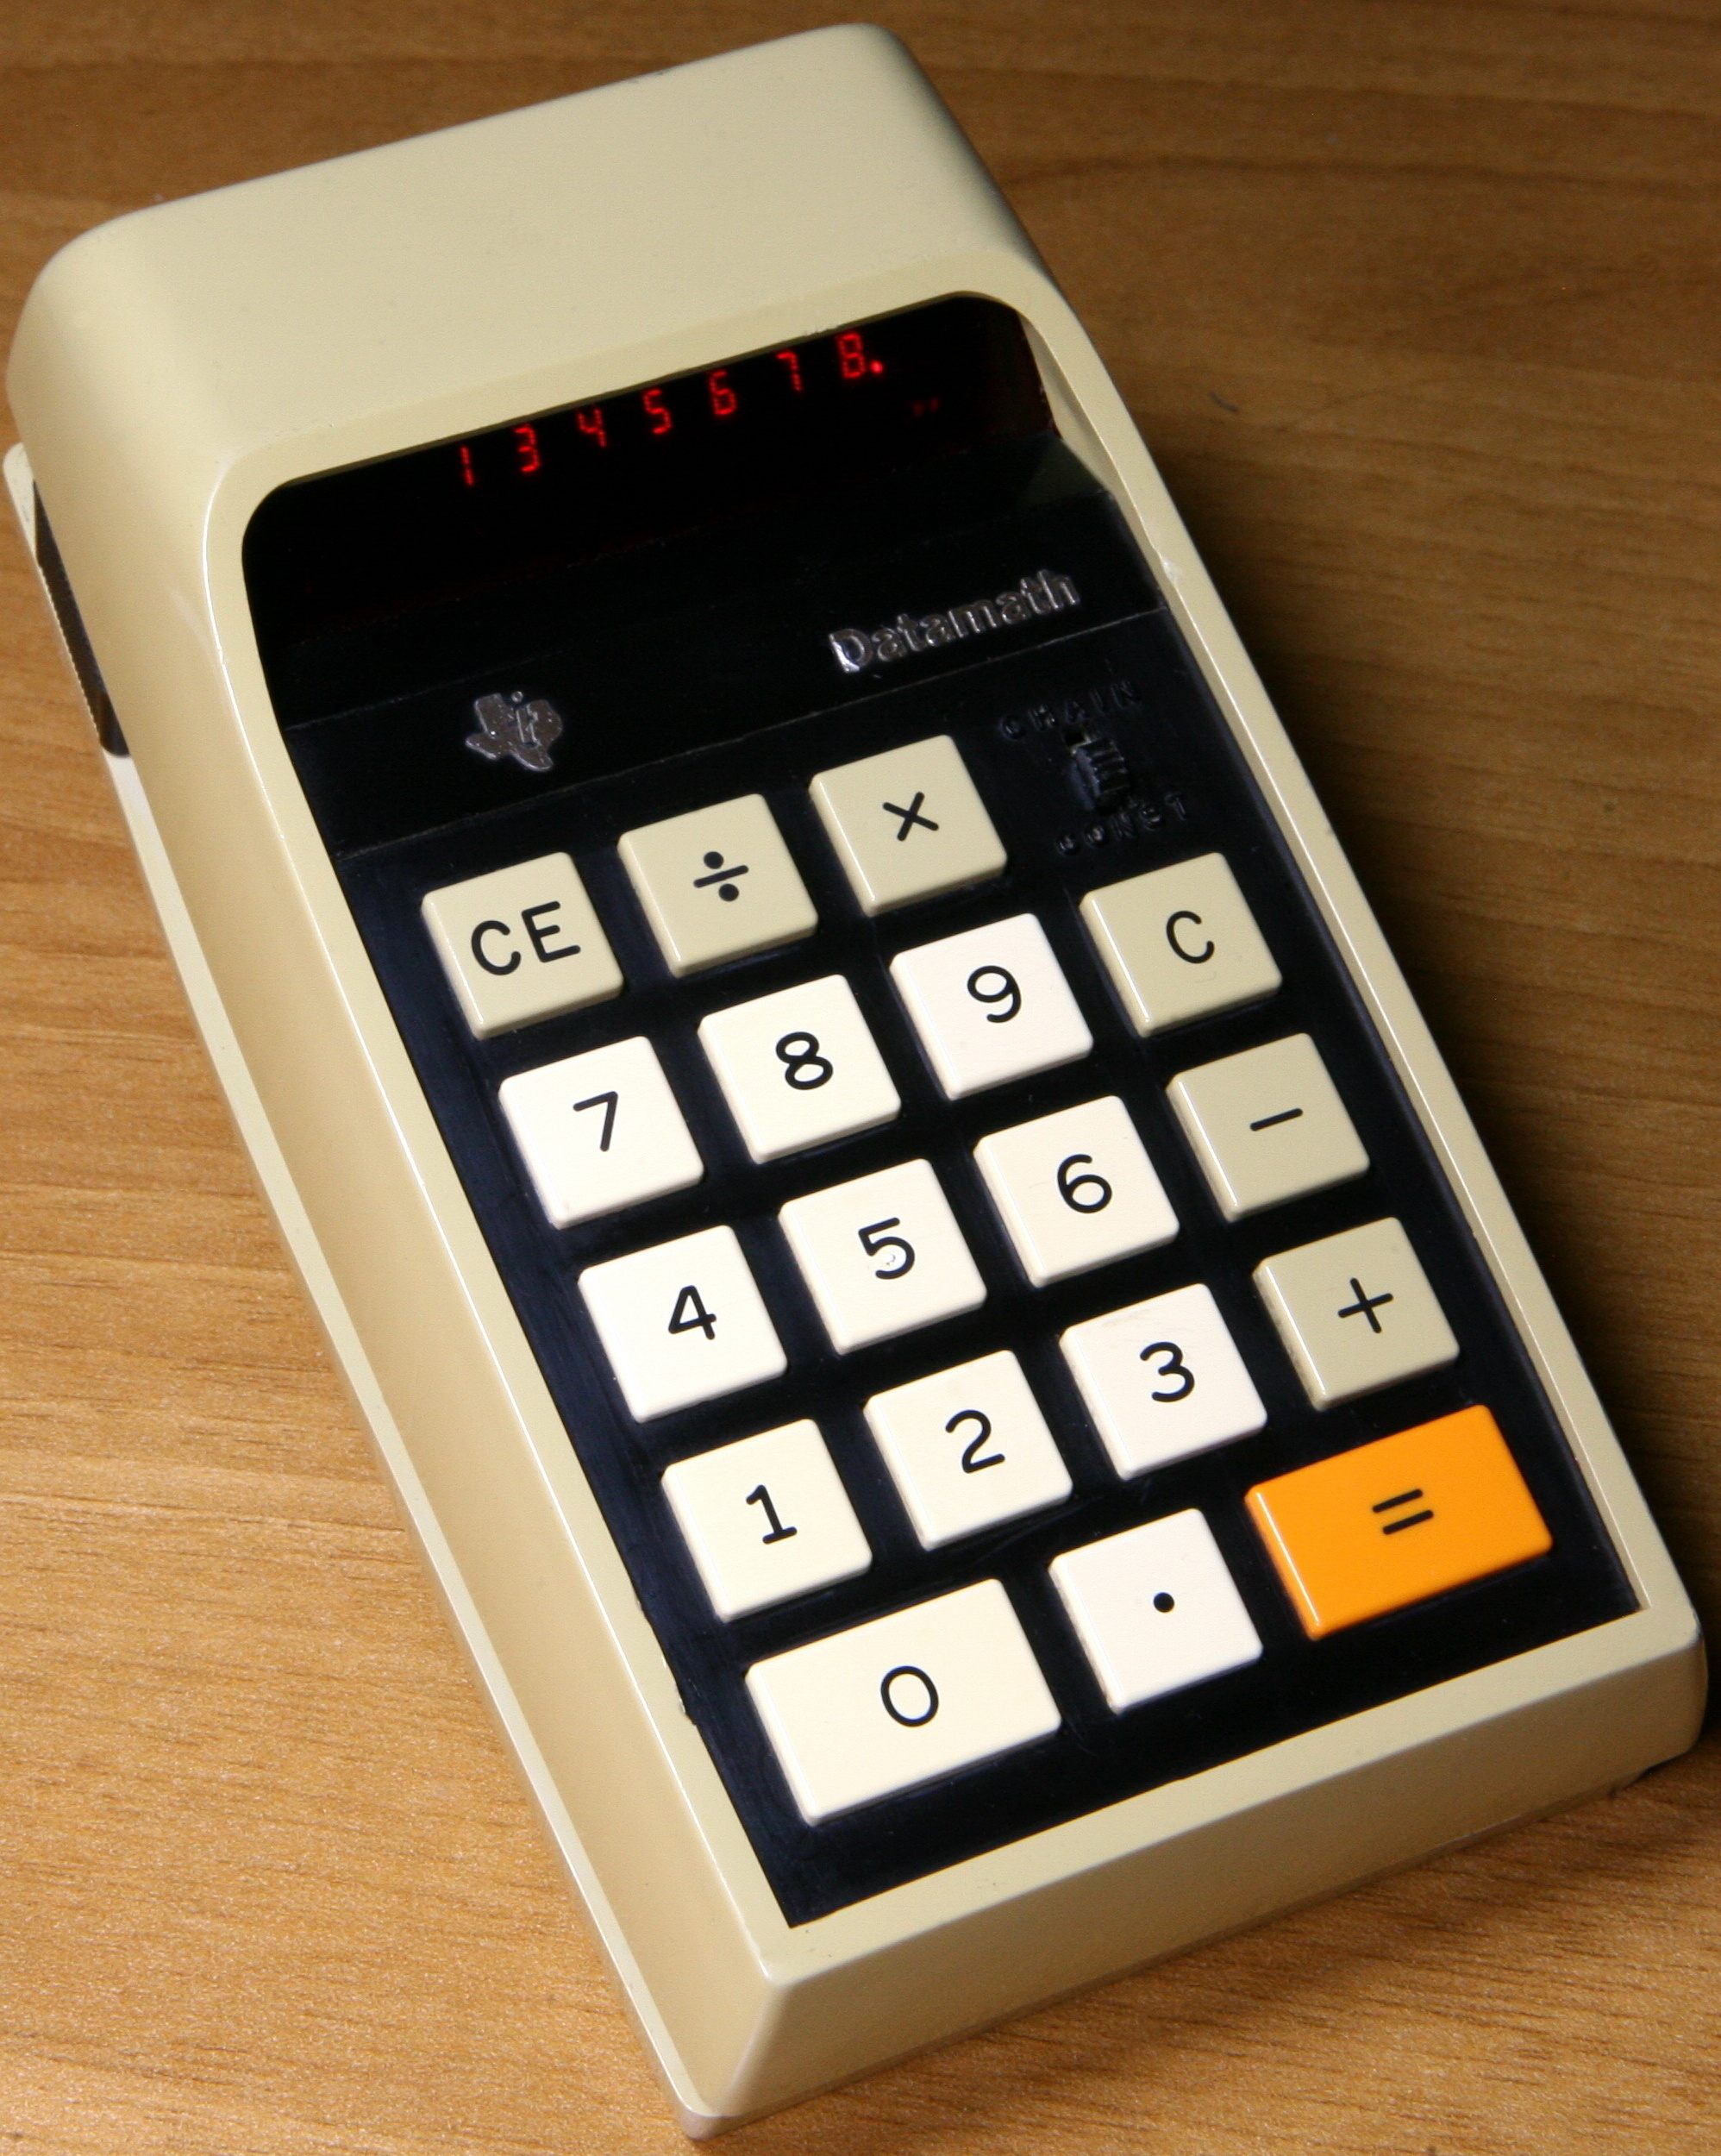 Speaking of calculators: The first one with a keypad like this was made in the late sixties. 